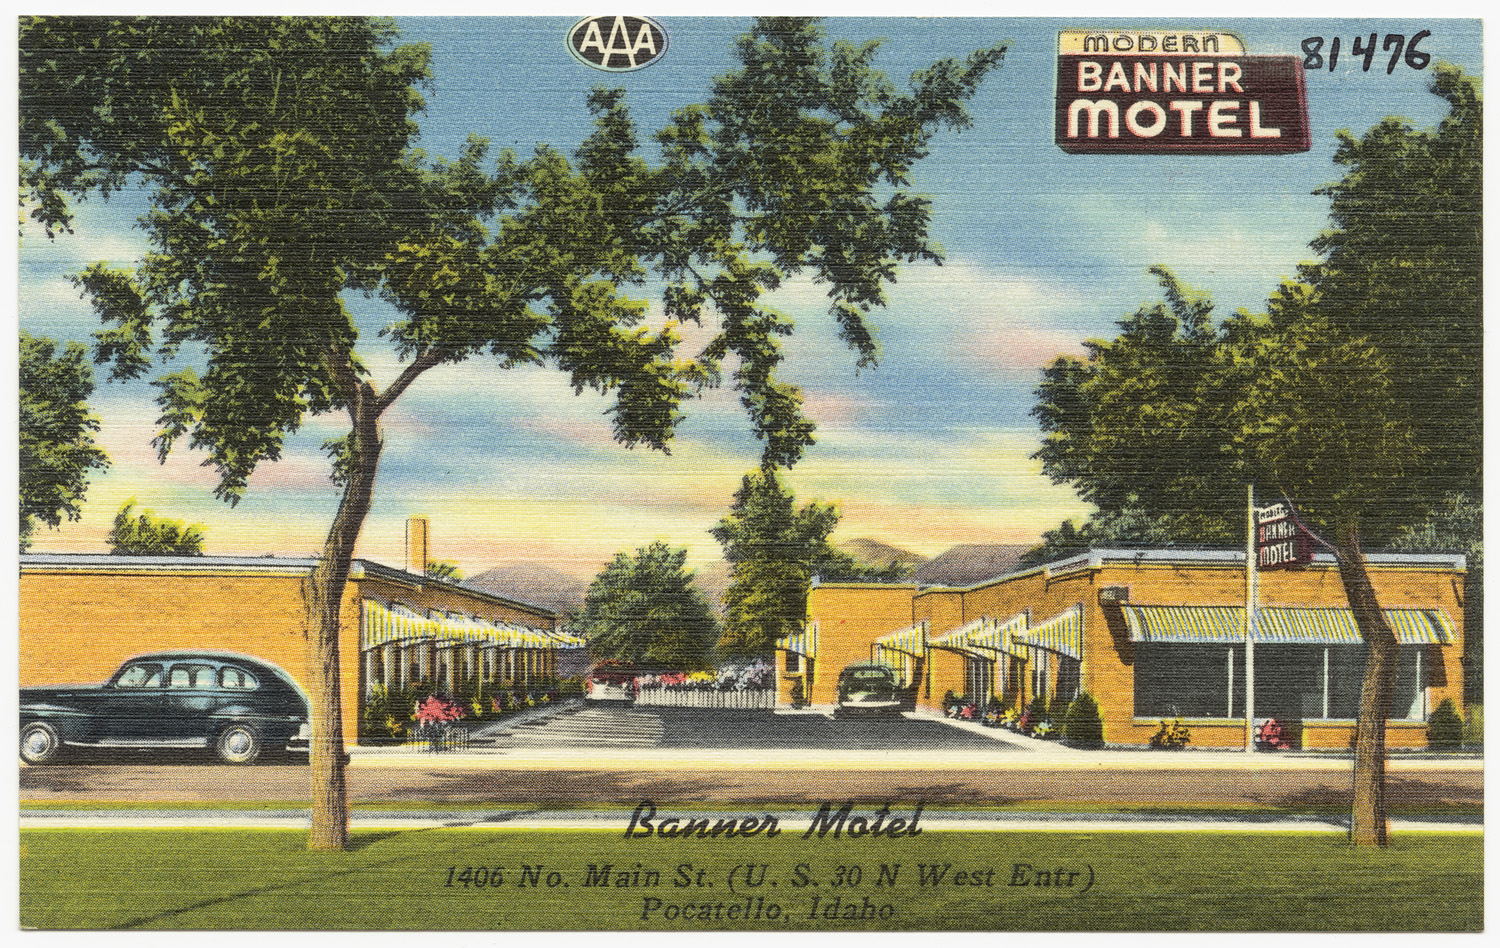 an old pograph of a motel, with cars parked